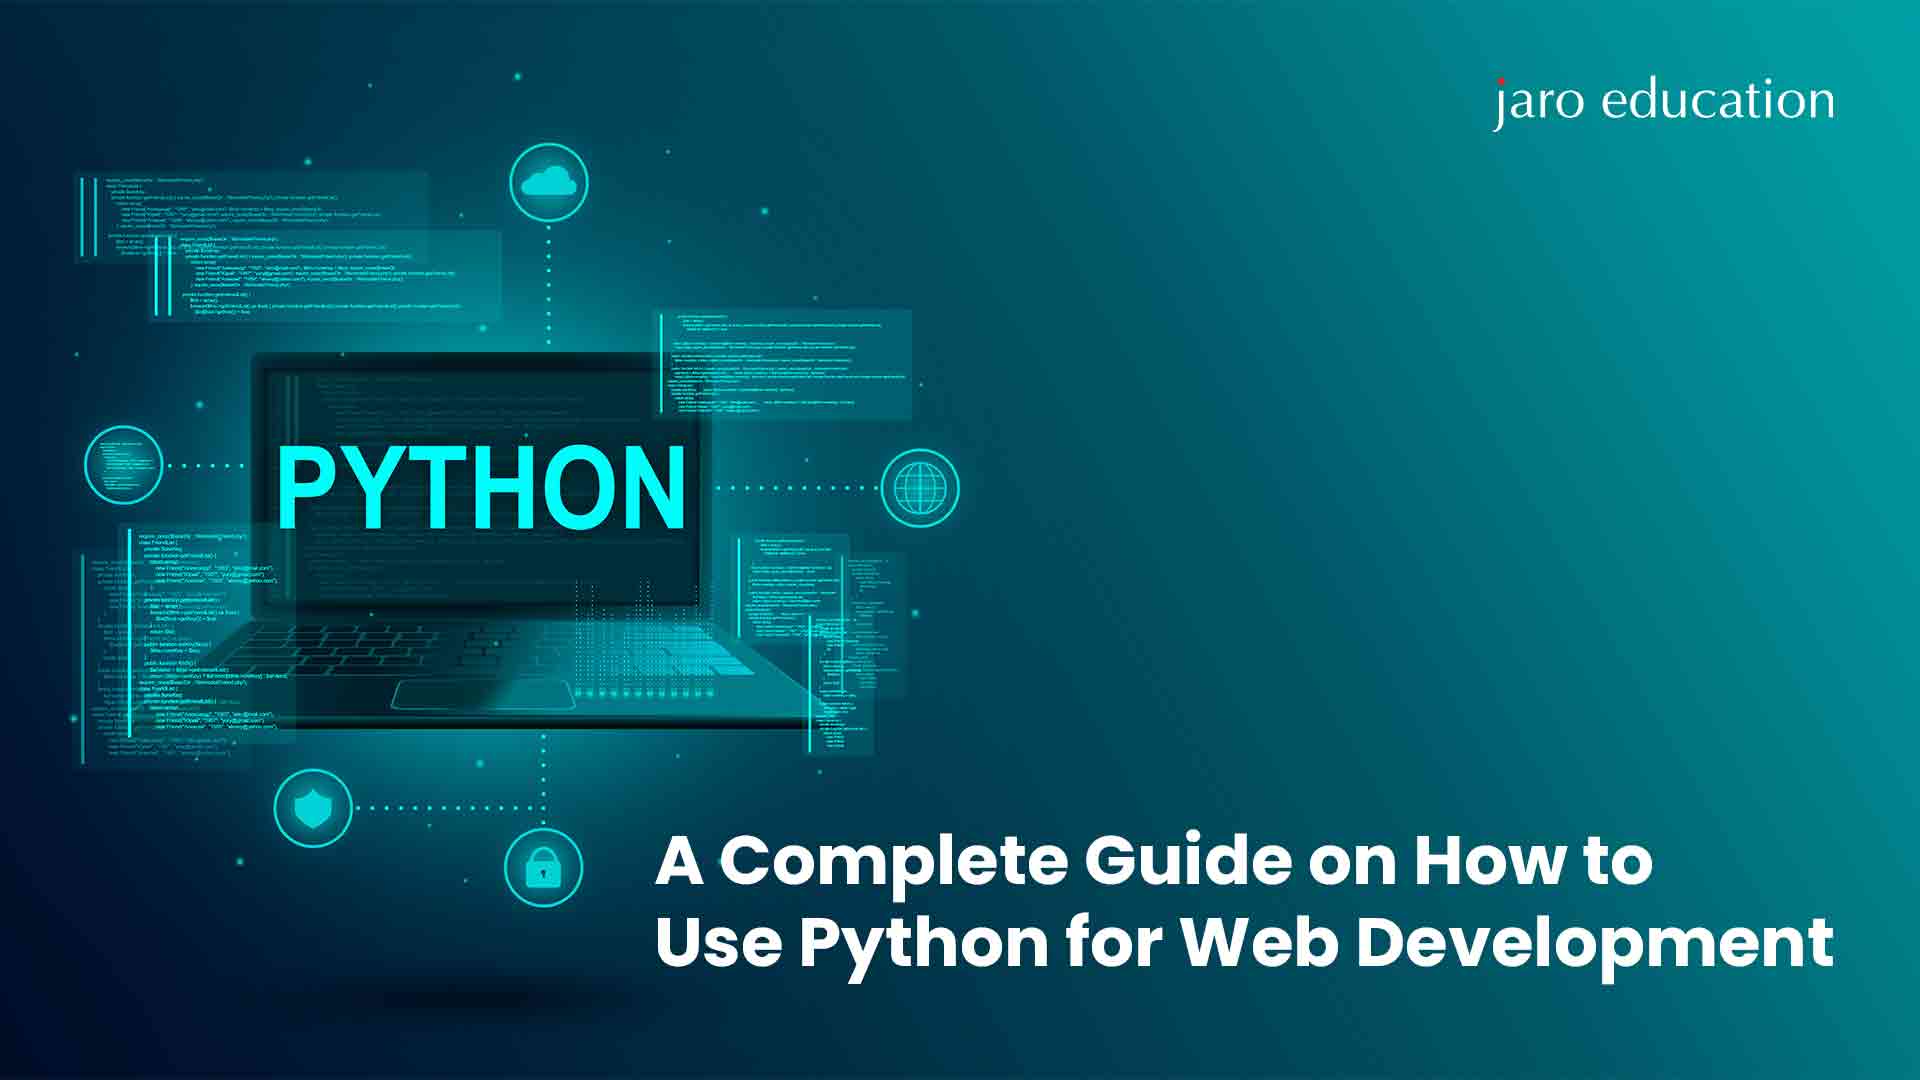 A Complete Guide on How to Use Python for Web Development